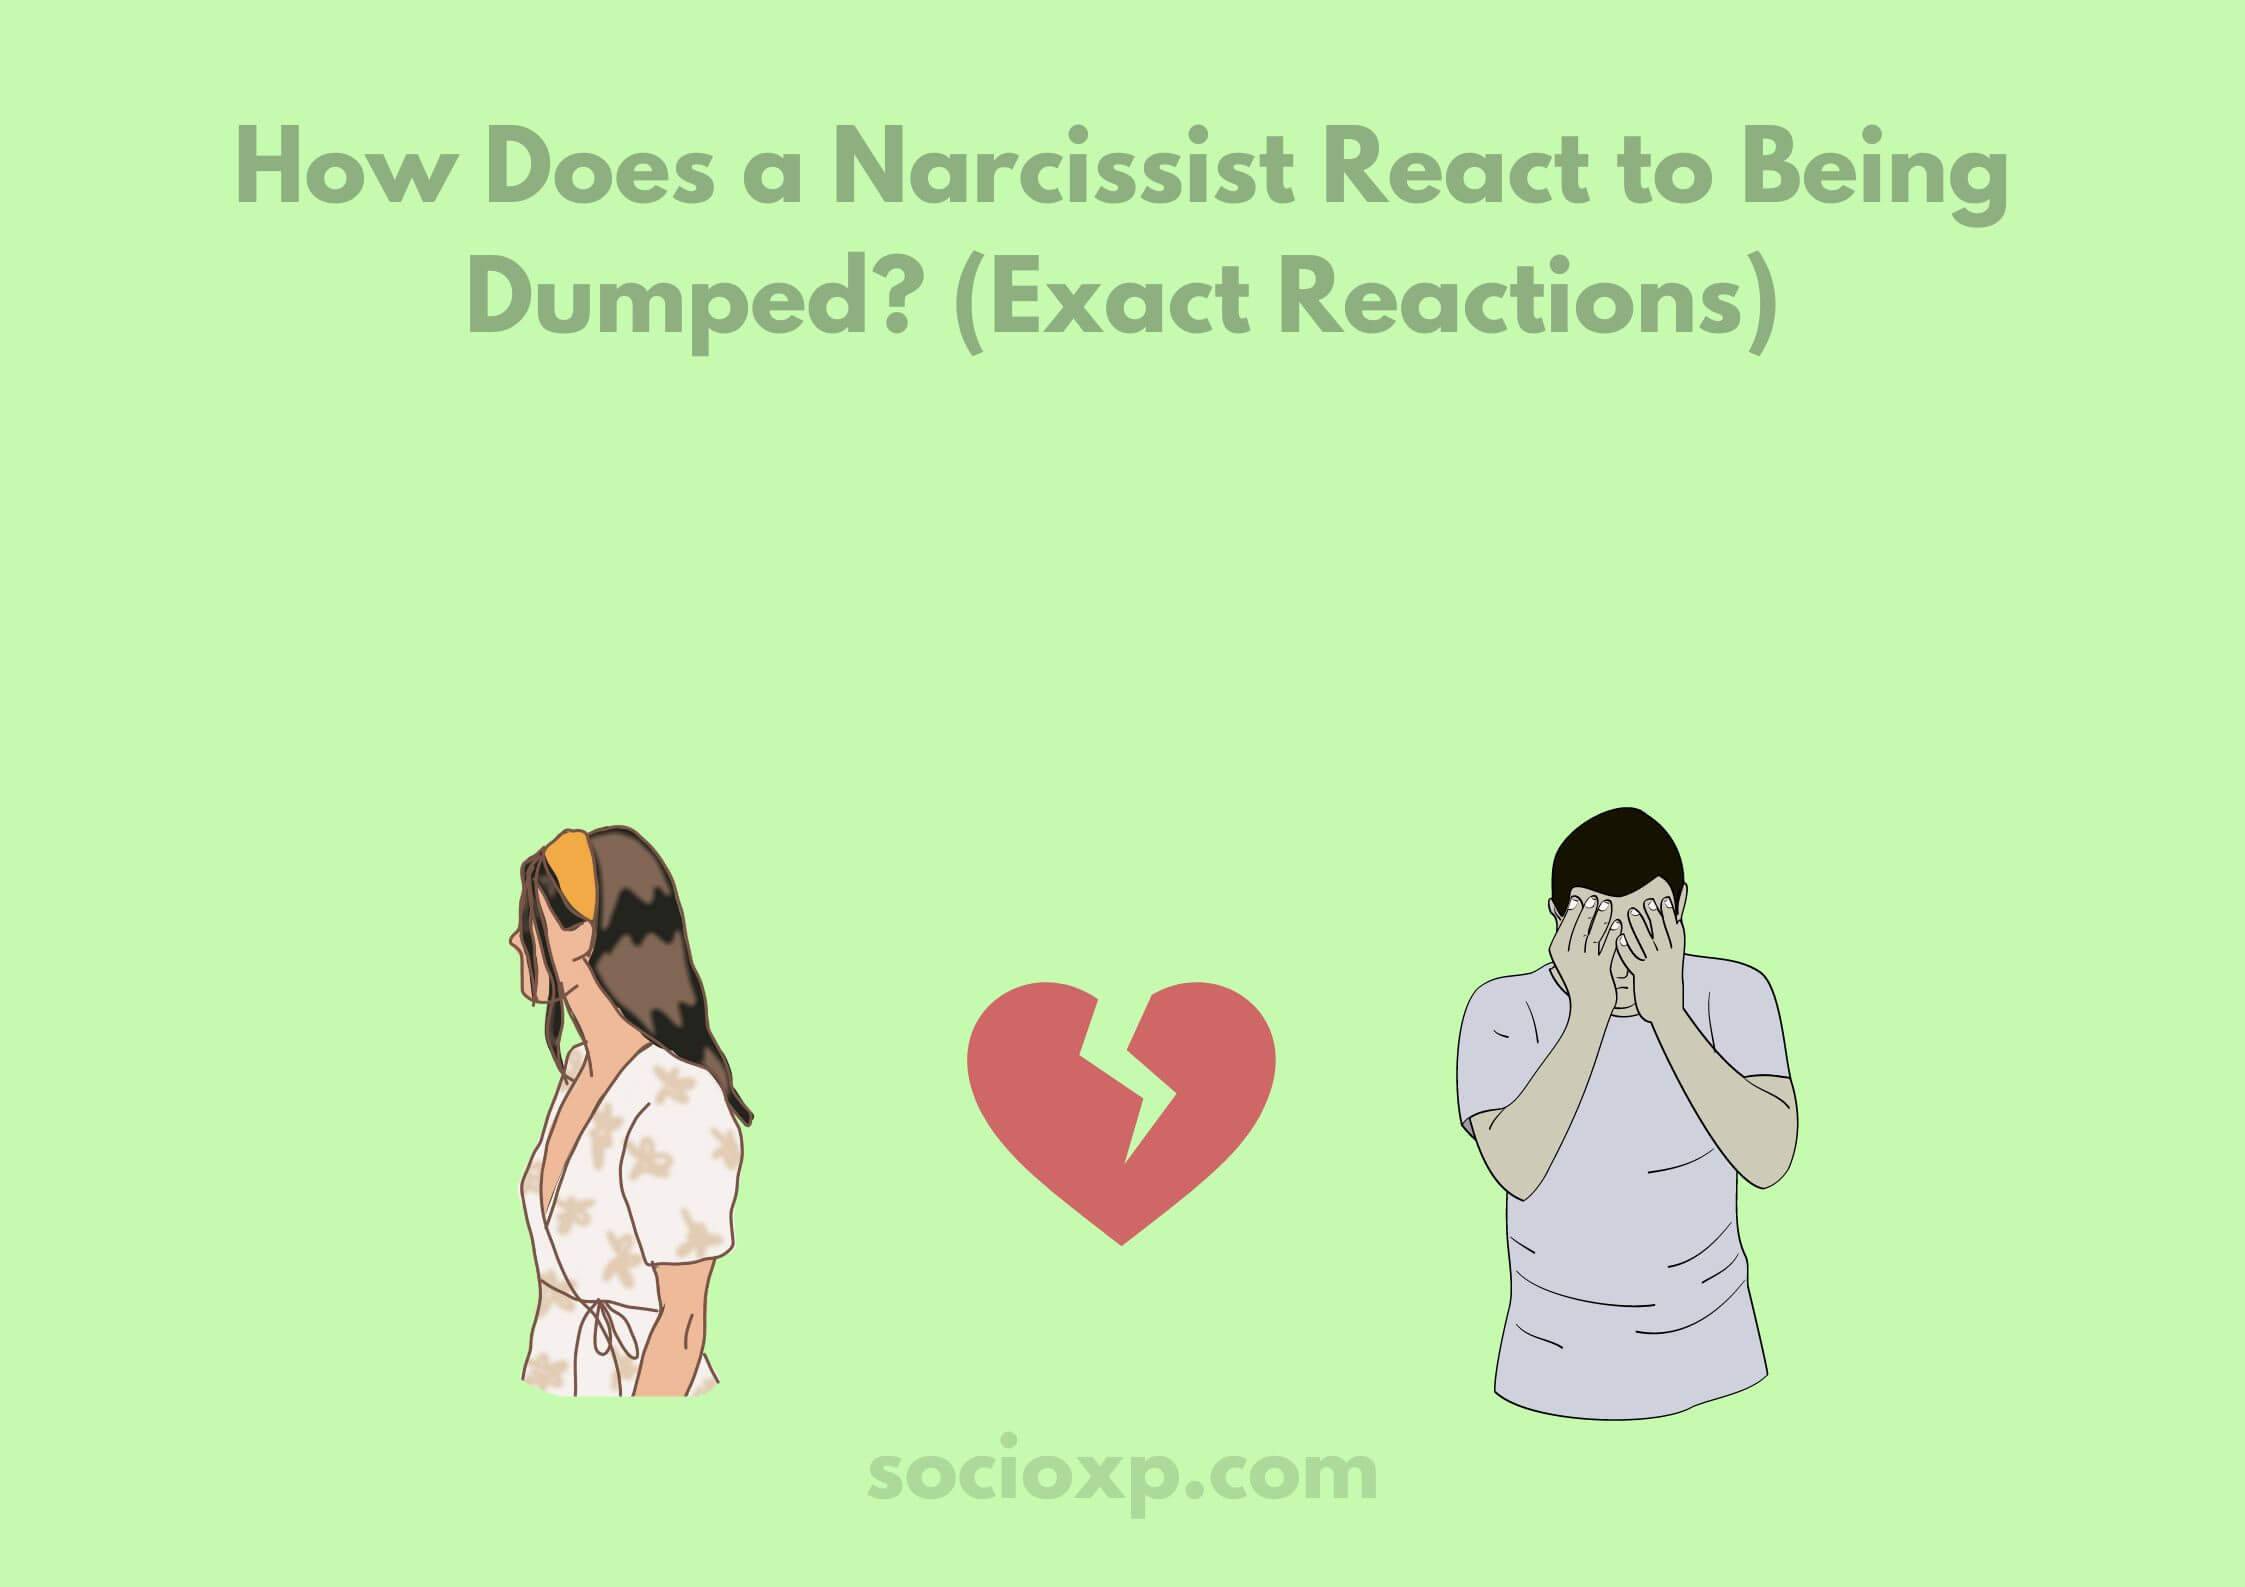 How Does a Narcissist React to Being Dumped? (Exact Reactions)